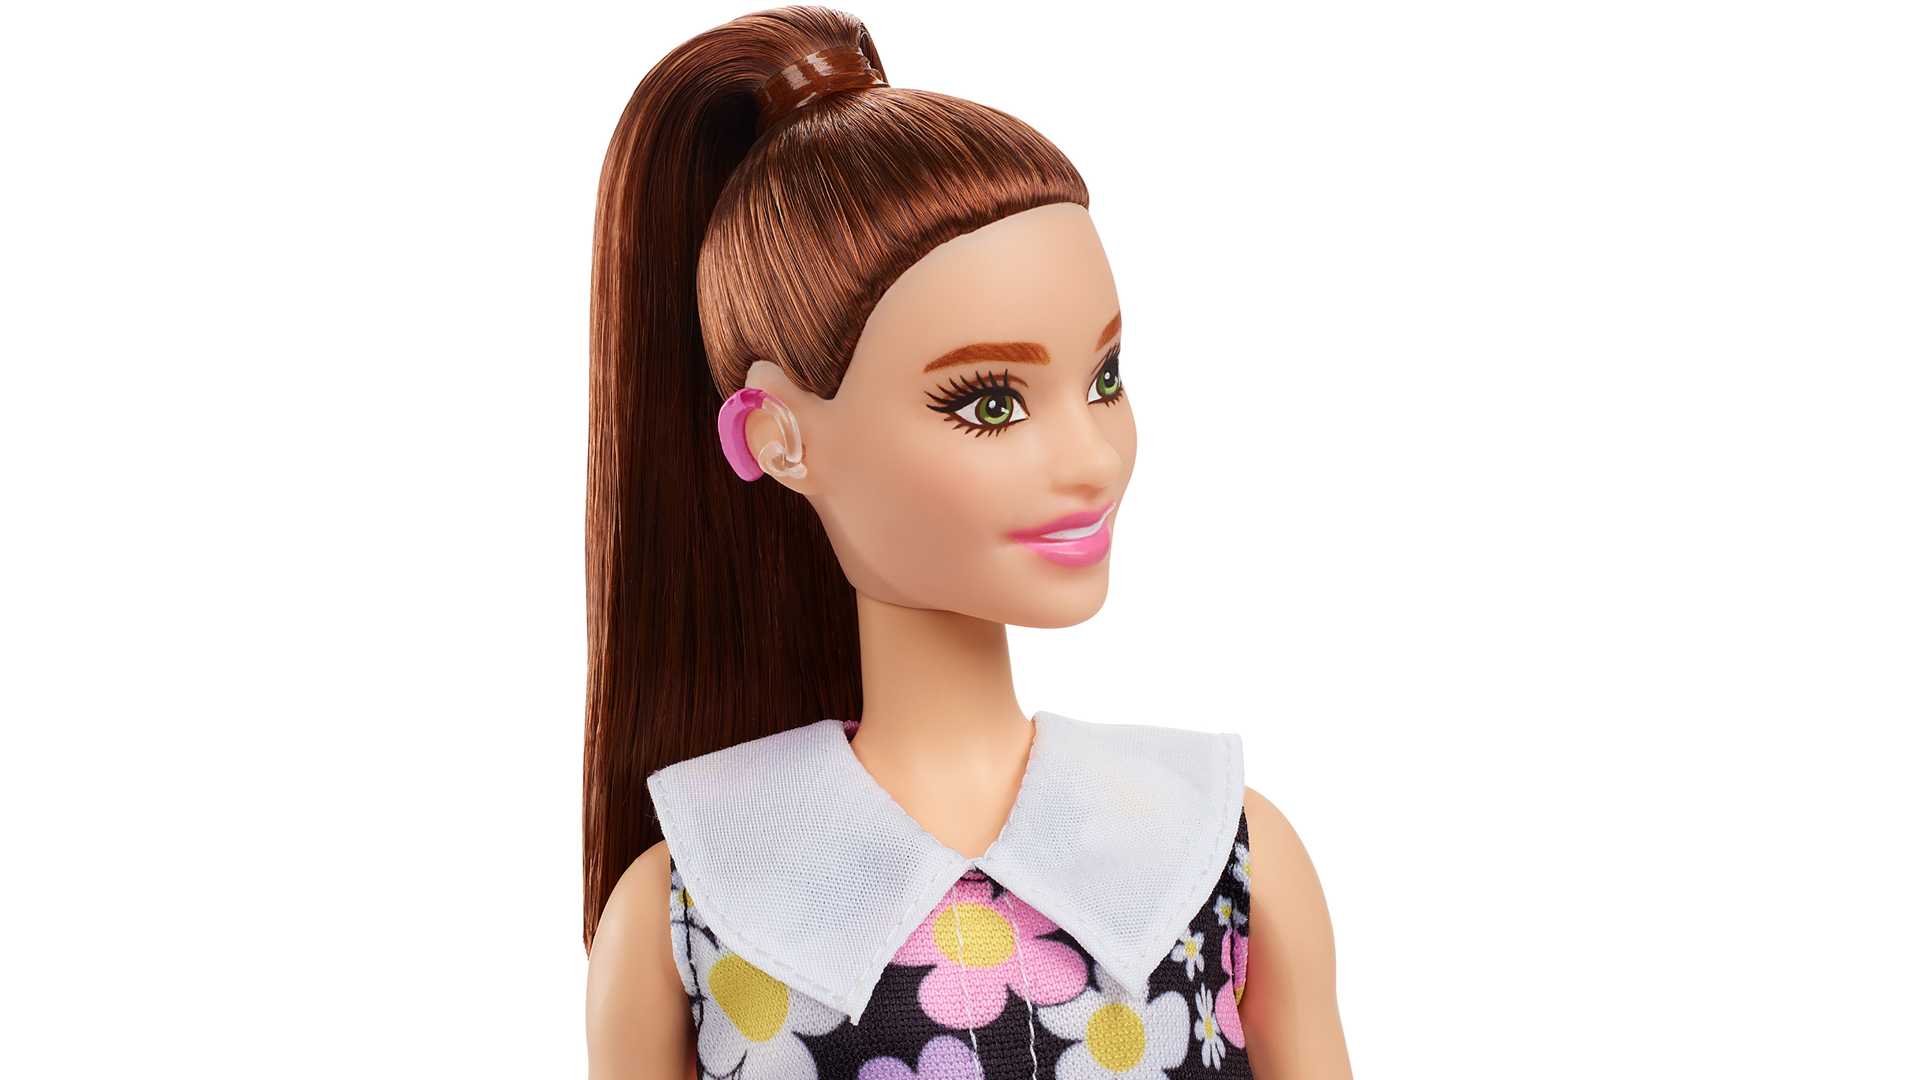 Cute new hairstyle and earrings for Designed by Cloe doll  rBratz